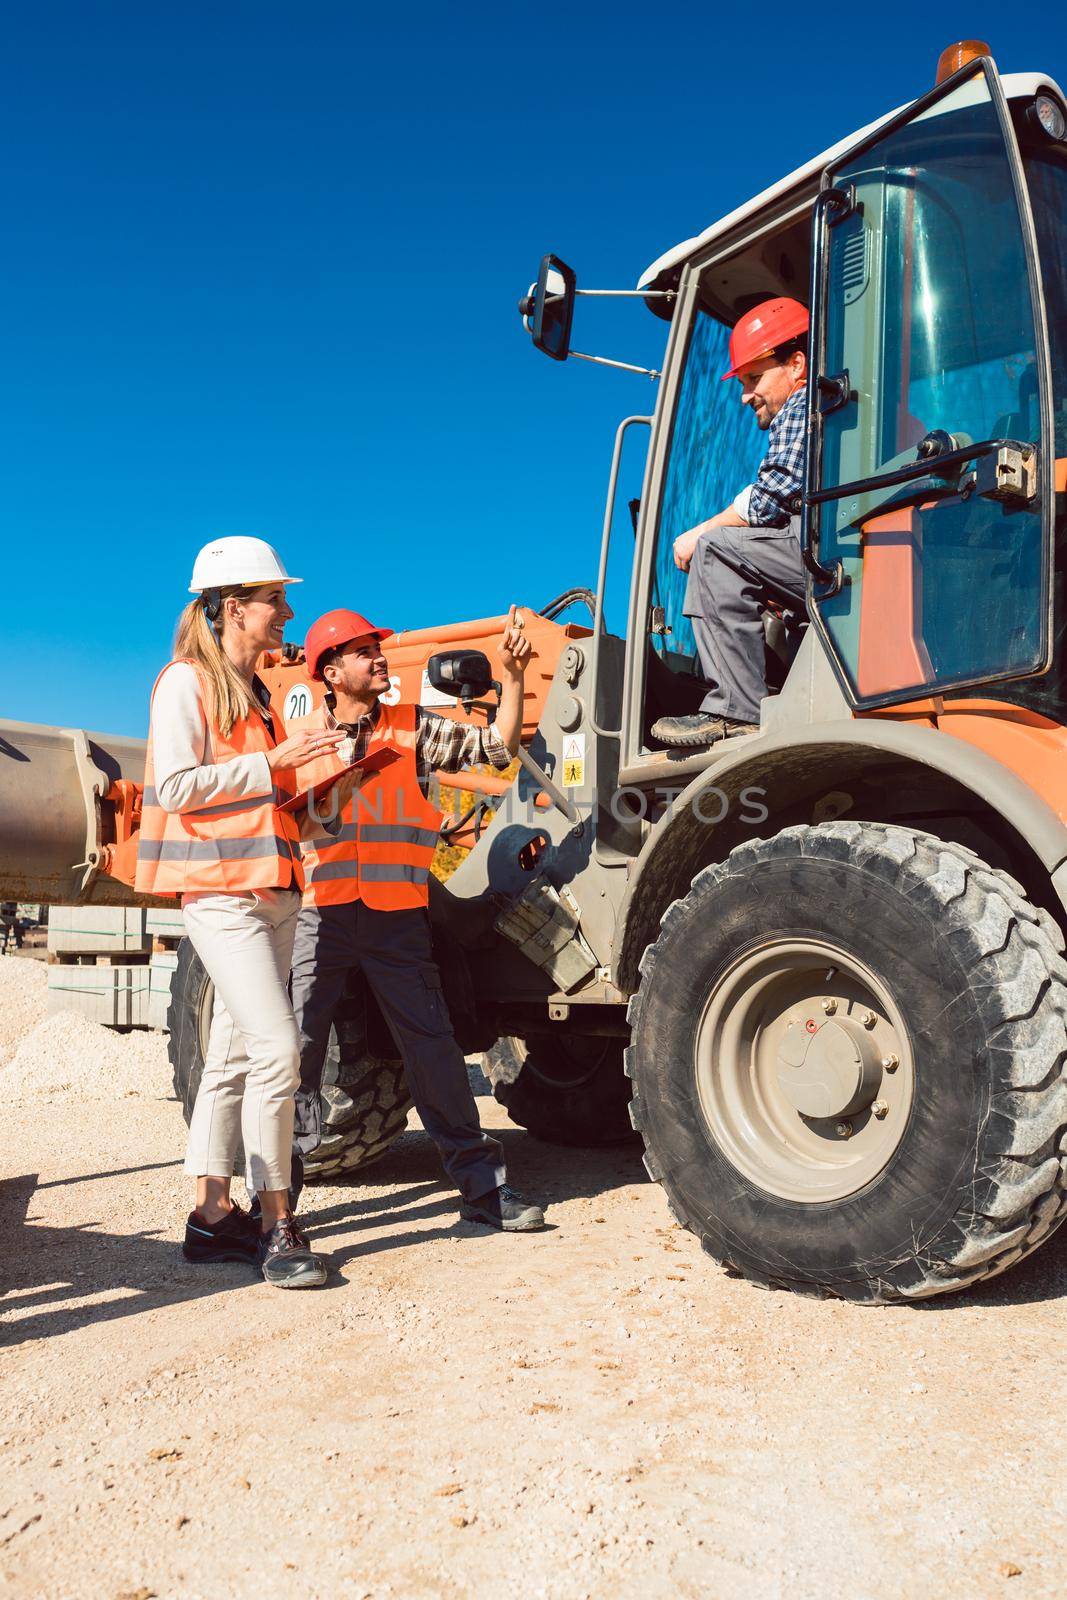 Civil engineer and worker discussion on road construction site, woman and man